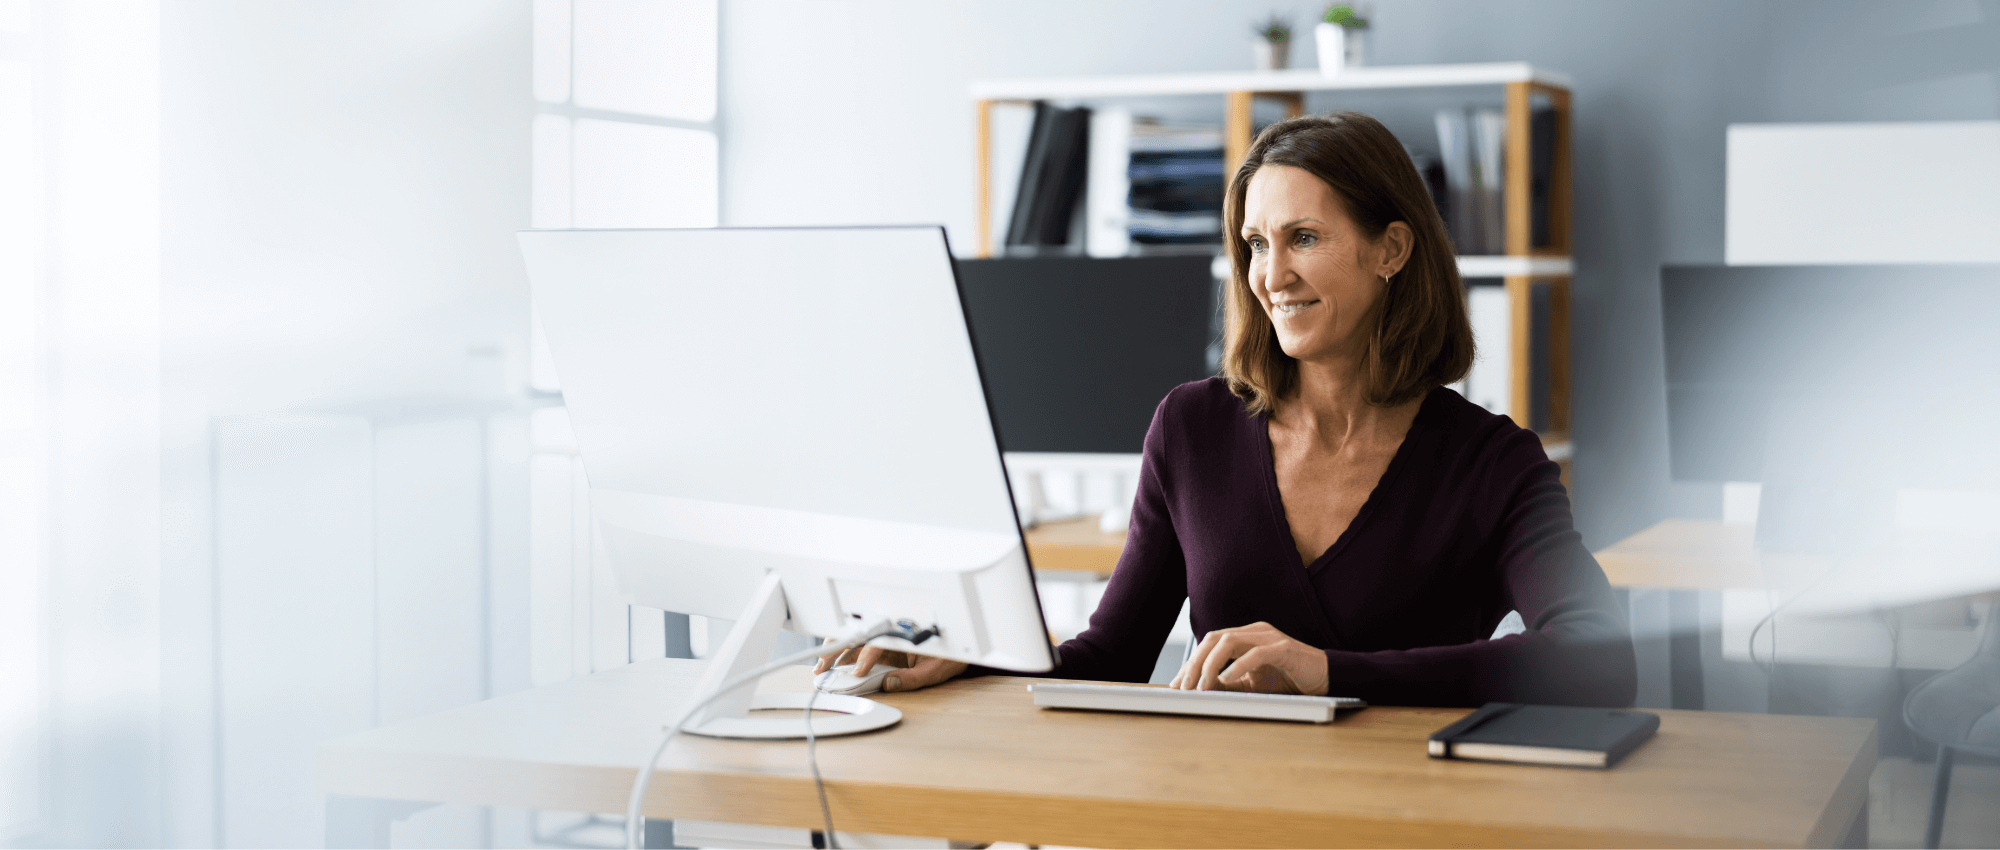 happy woman in office on computer